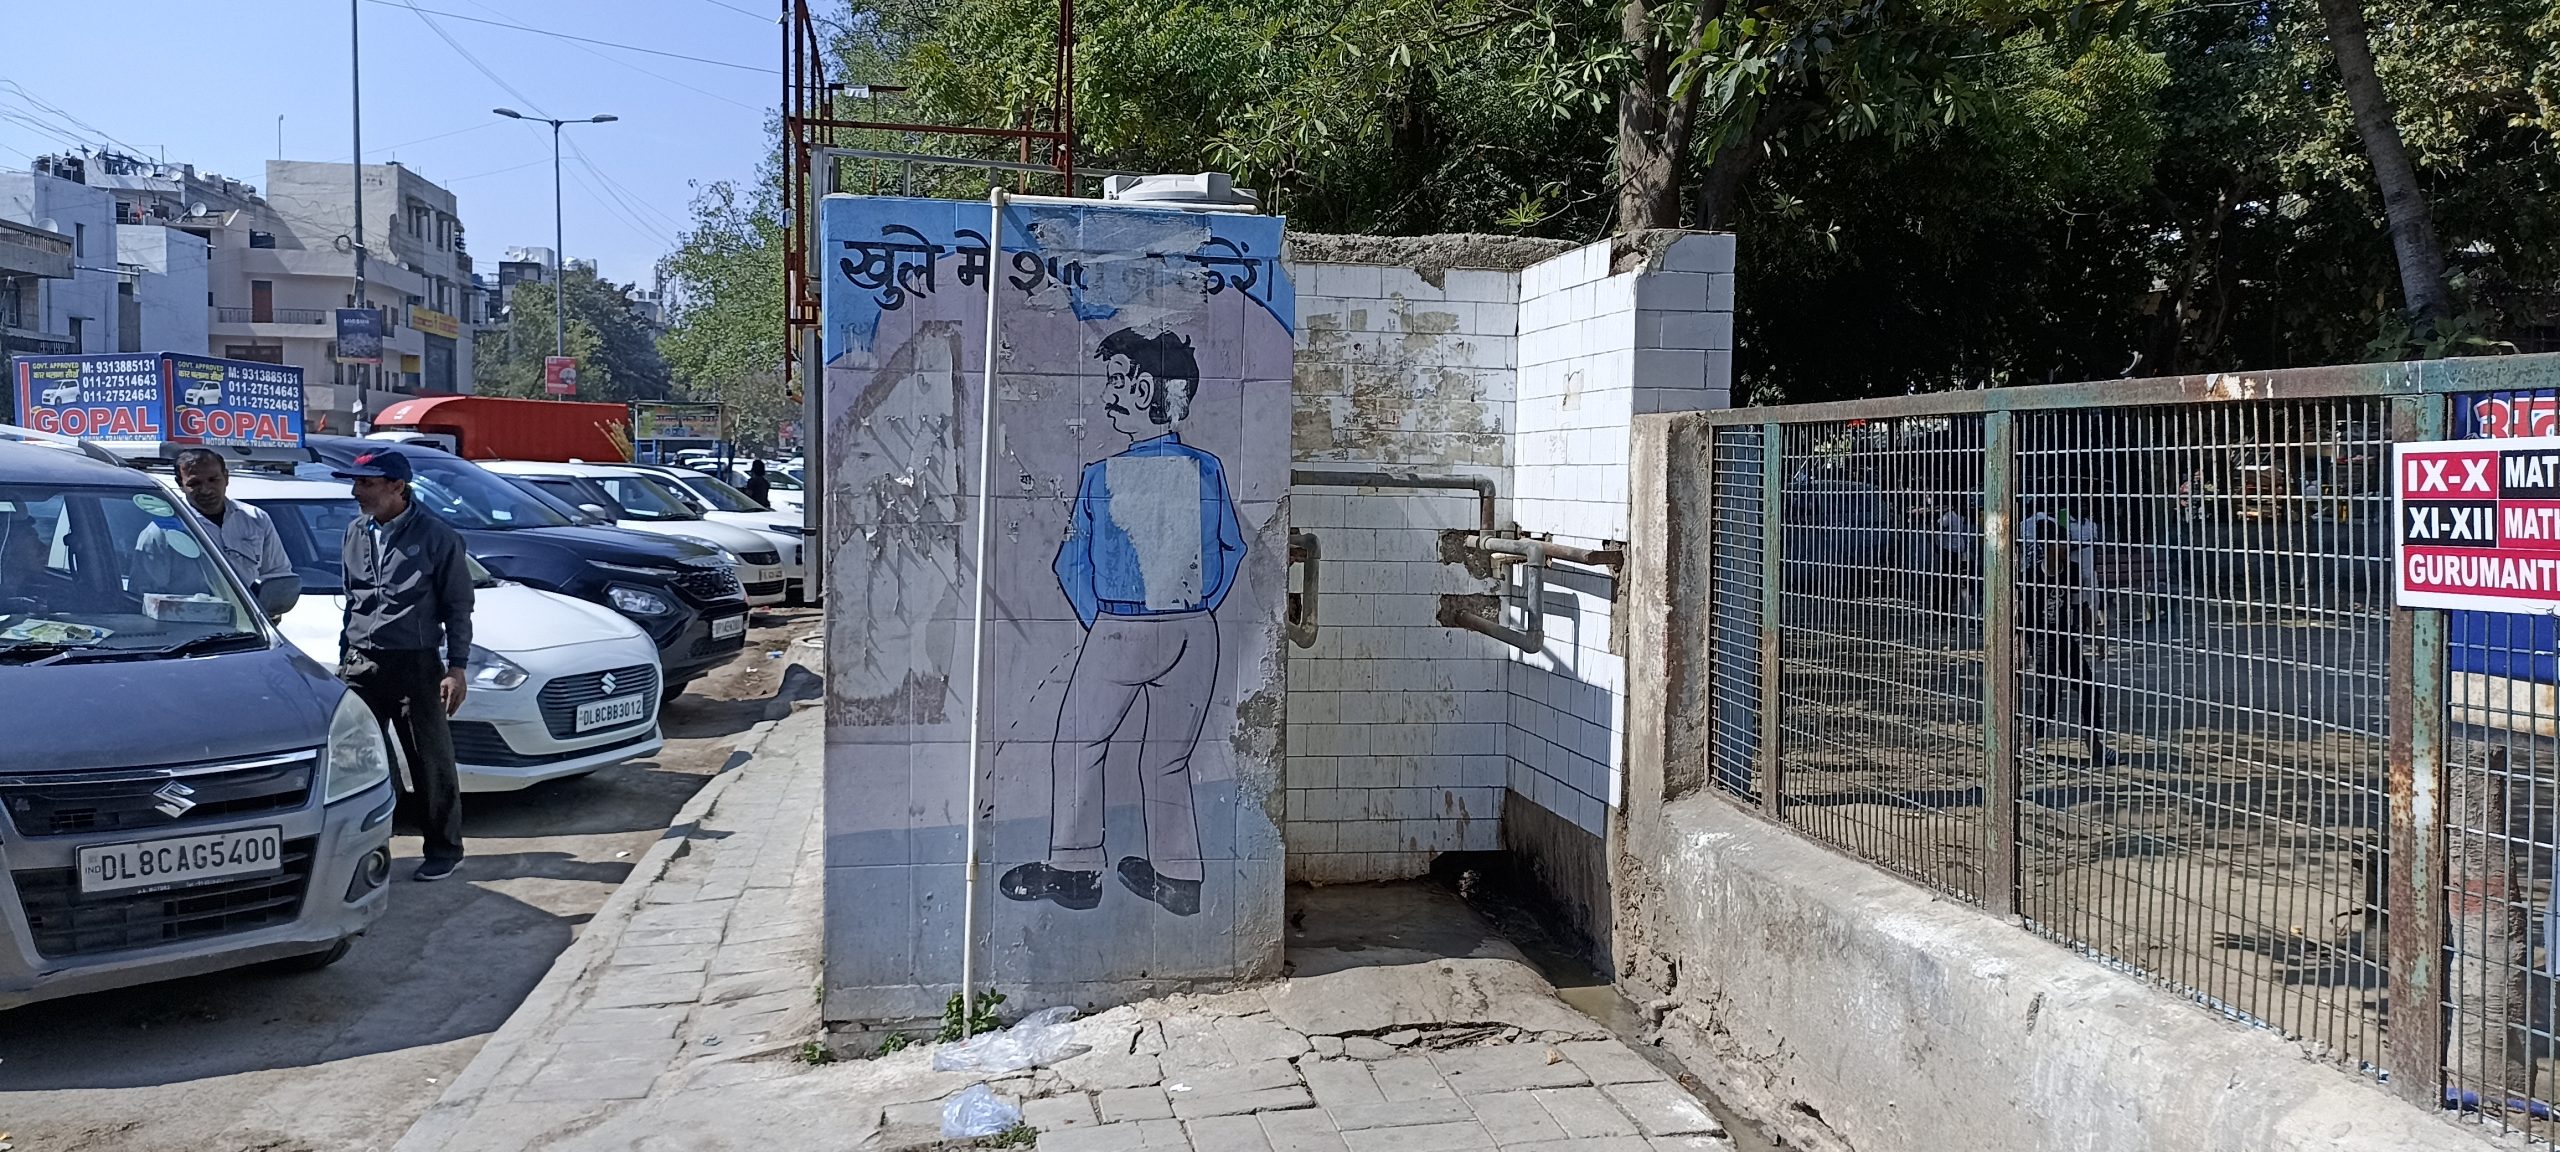 Shop owners in Delhi’s markets bear the brunt of ill-maintained toilets